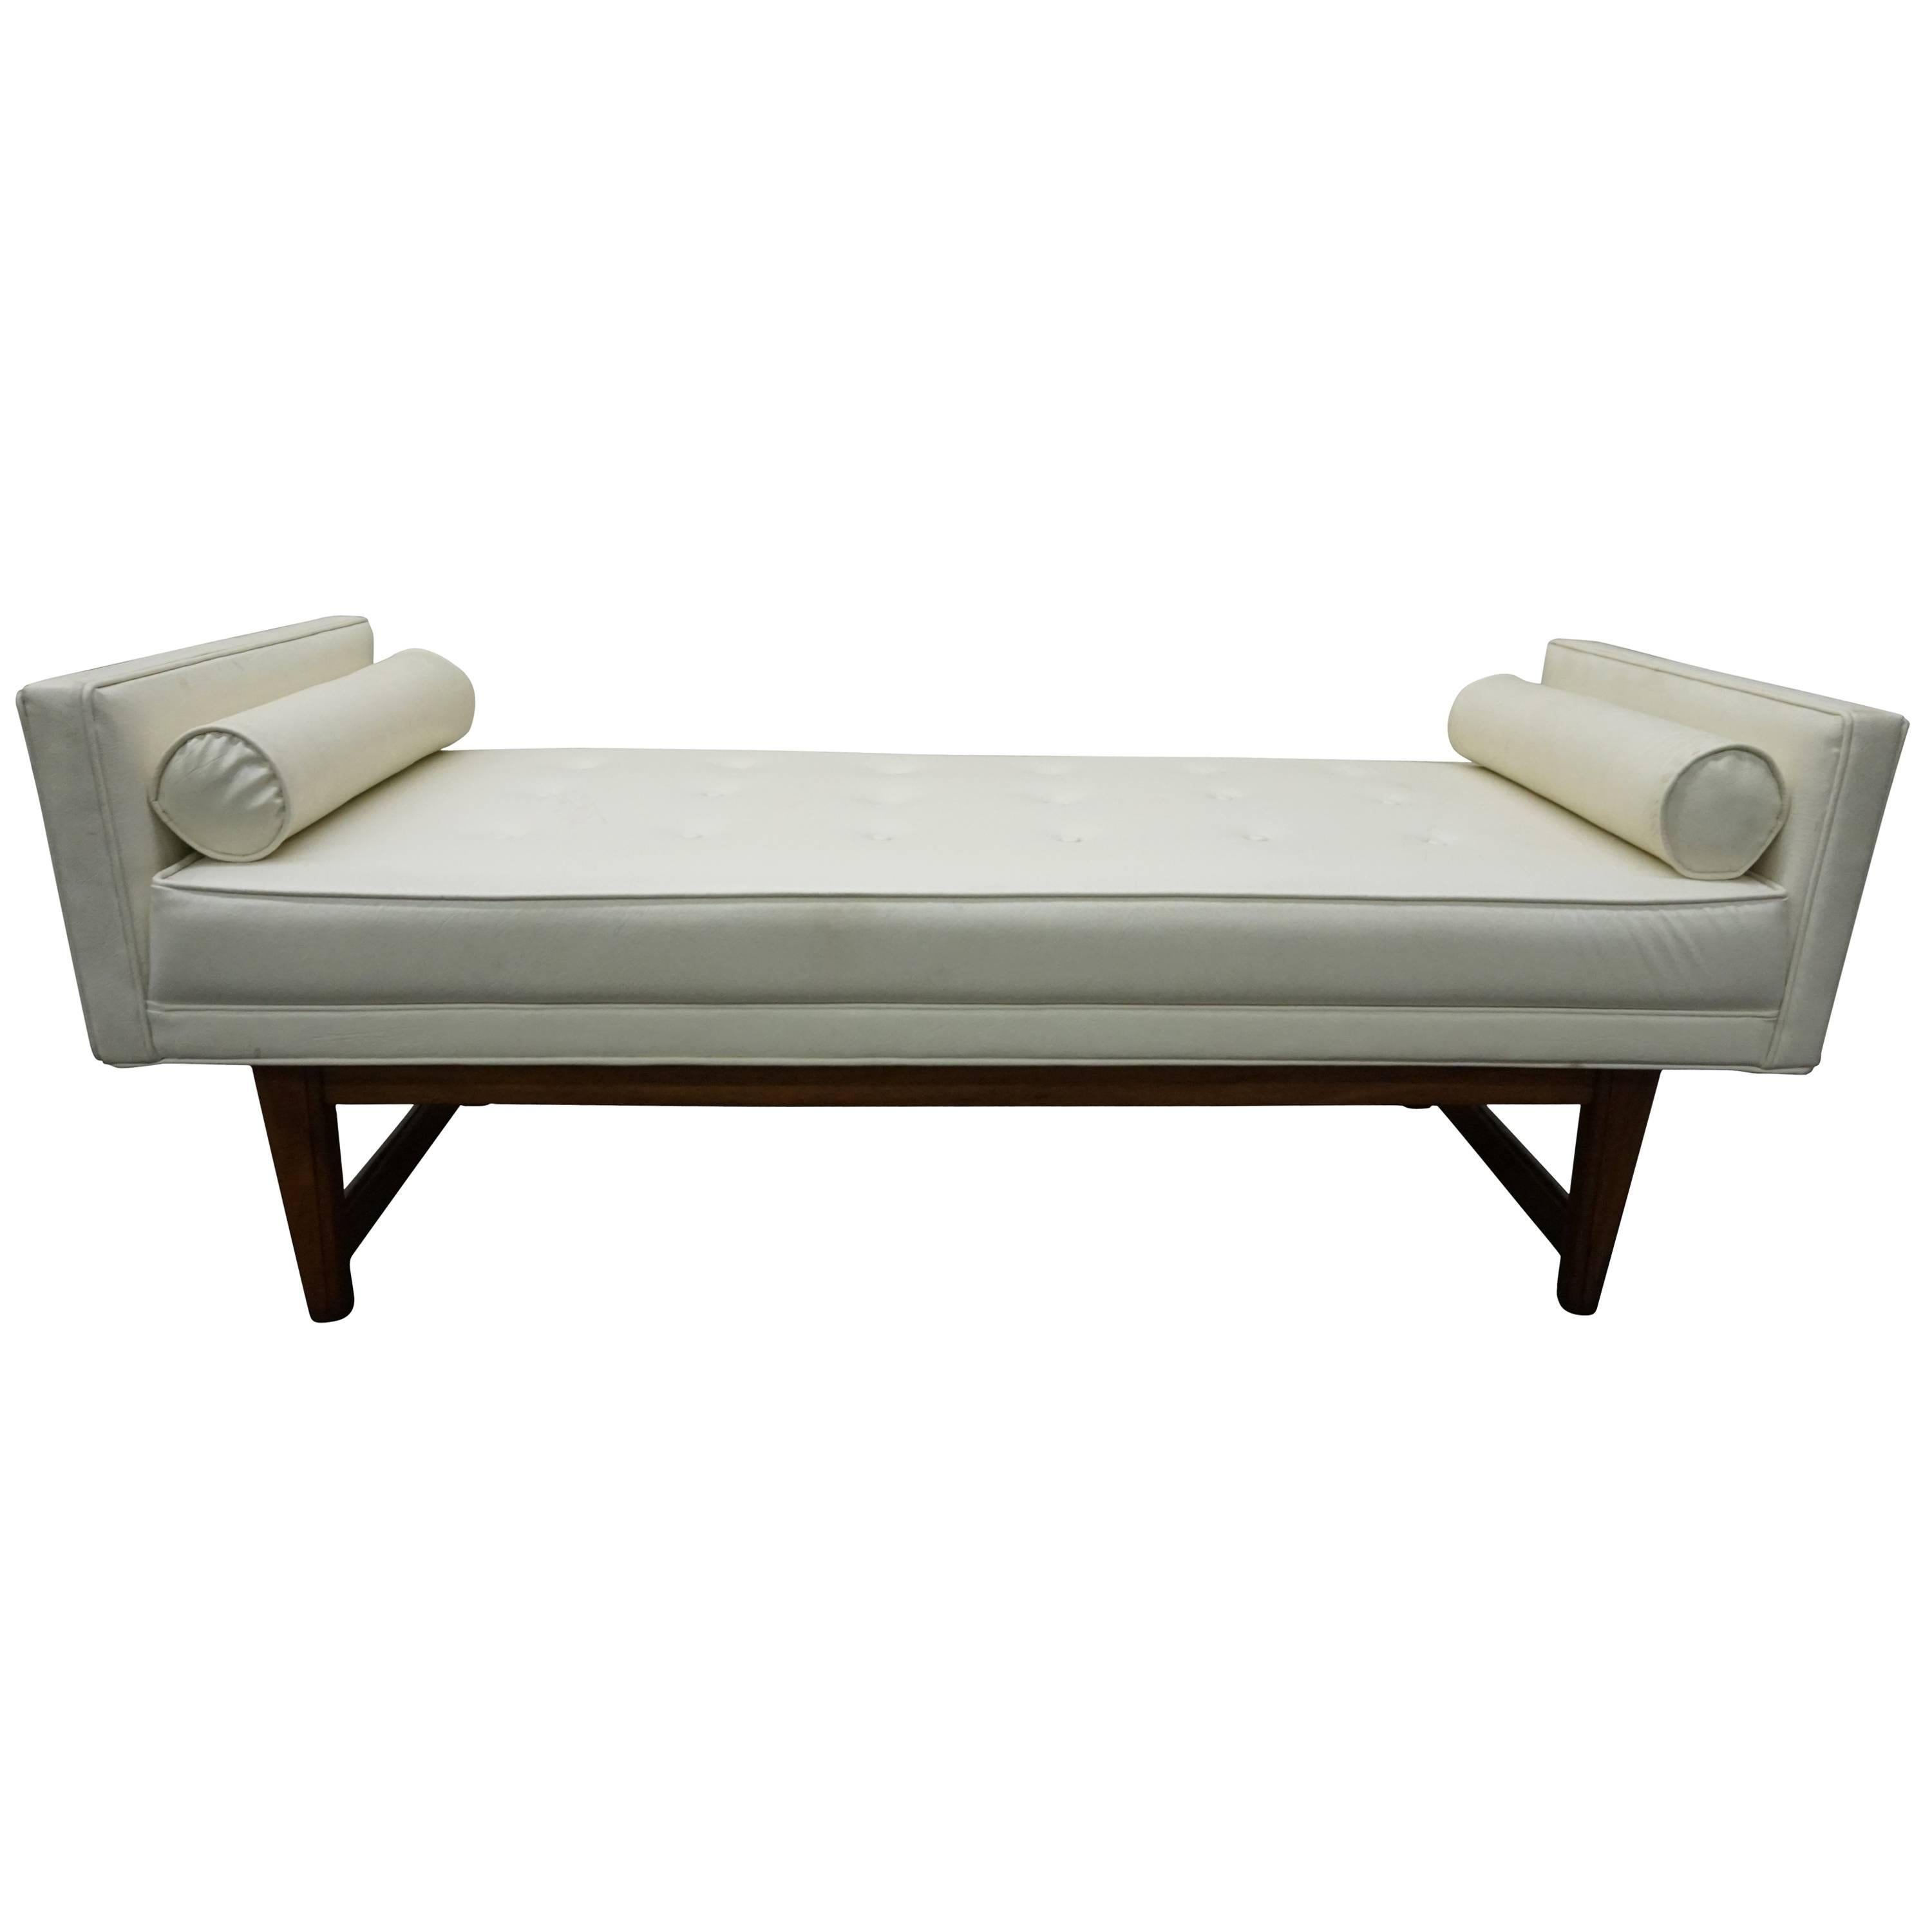 Handsome Upholstered American Mid-century Walnut Bench